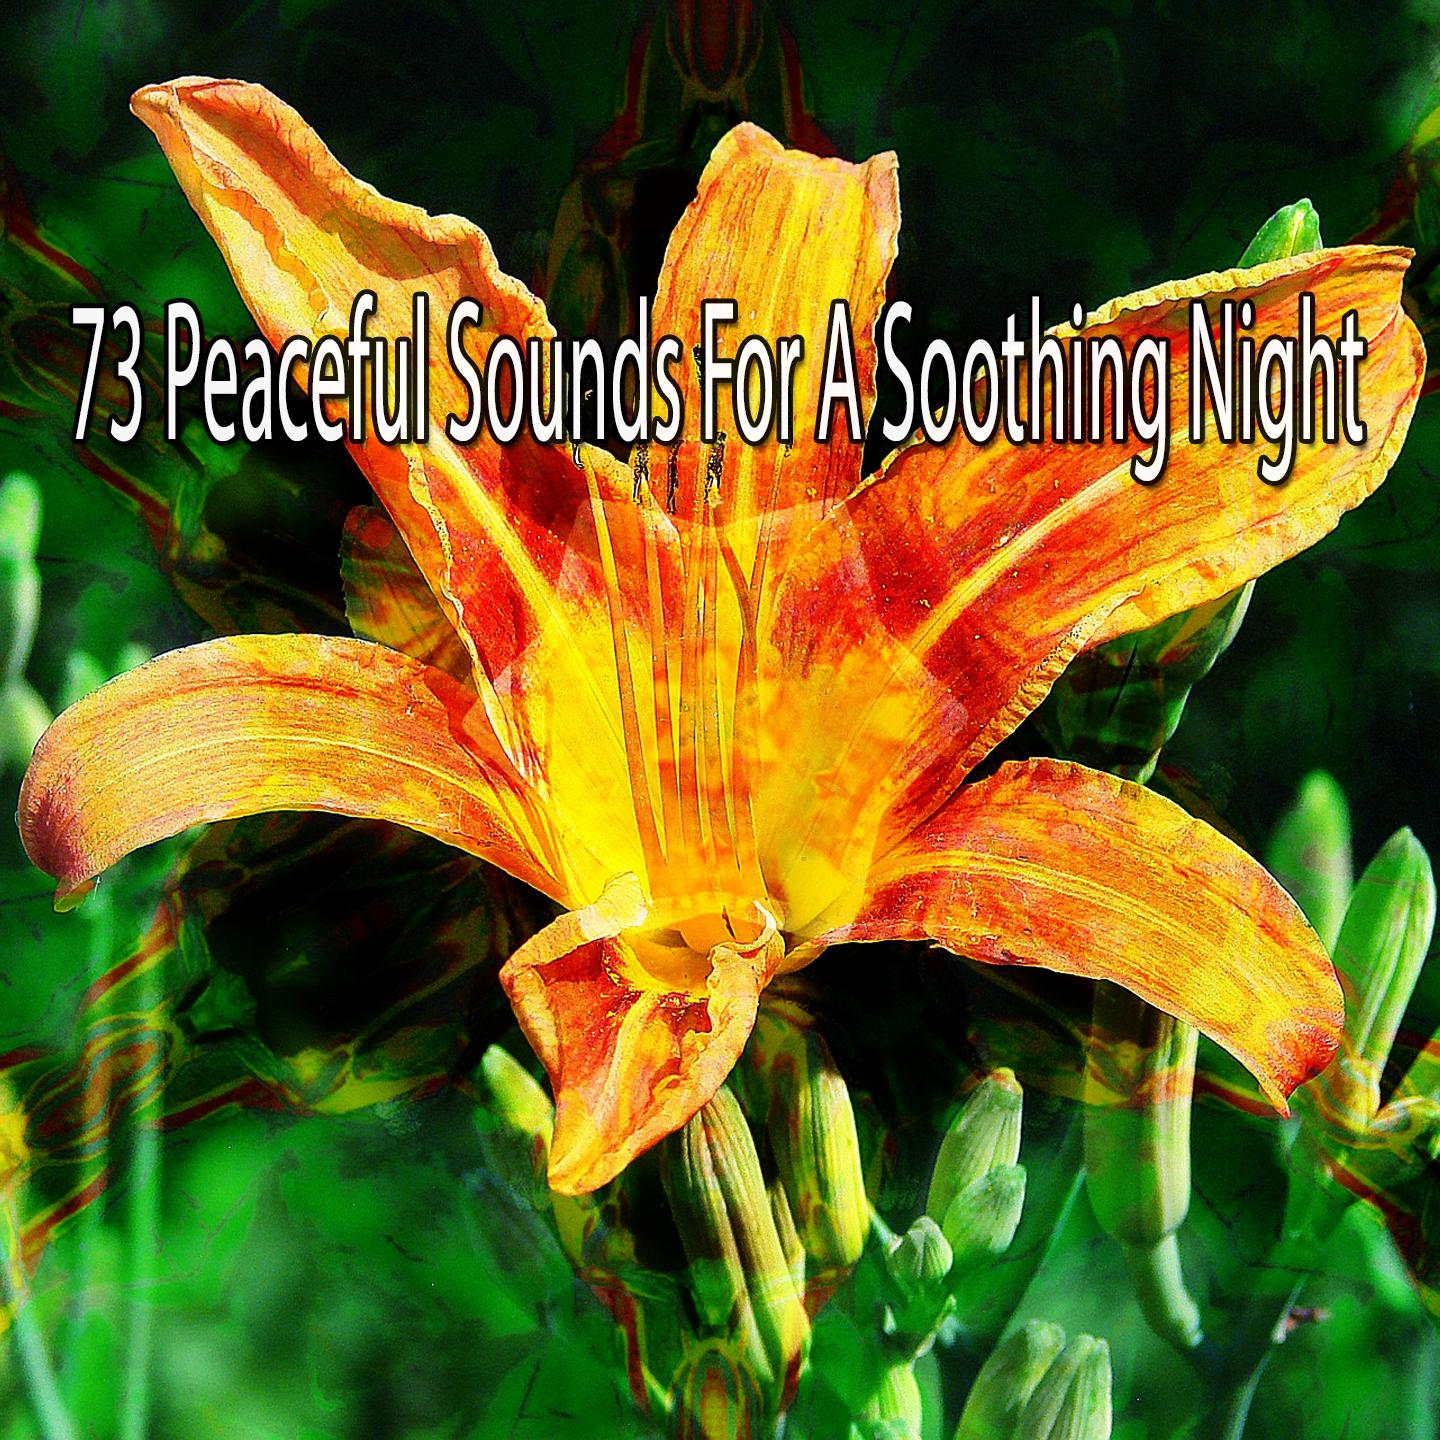 73 Peaceful Sounds for a Soothing Night